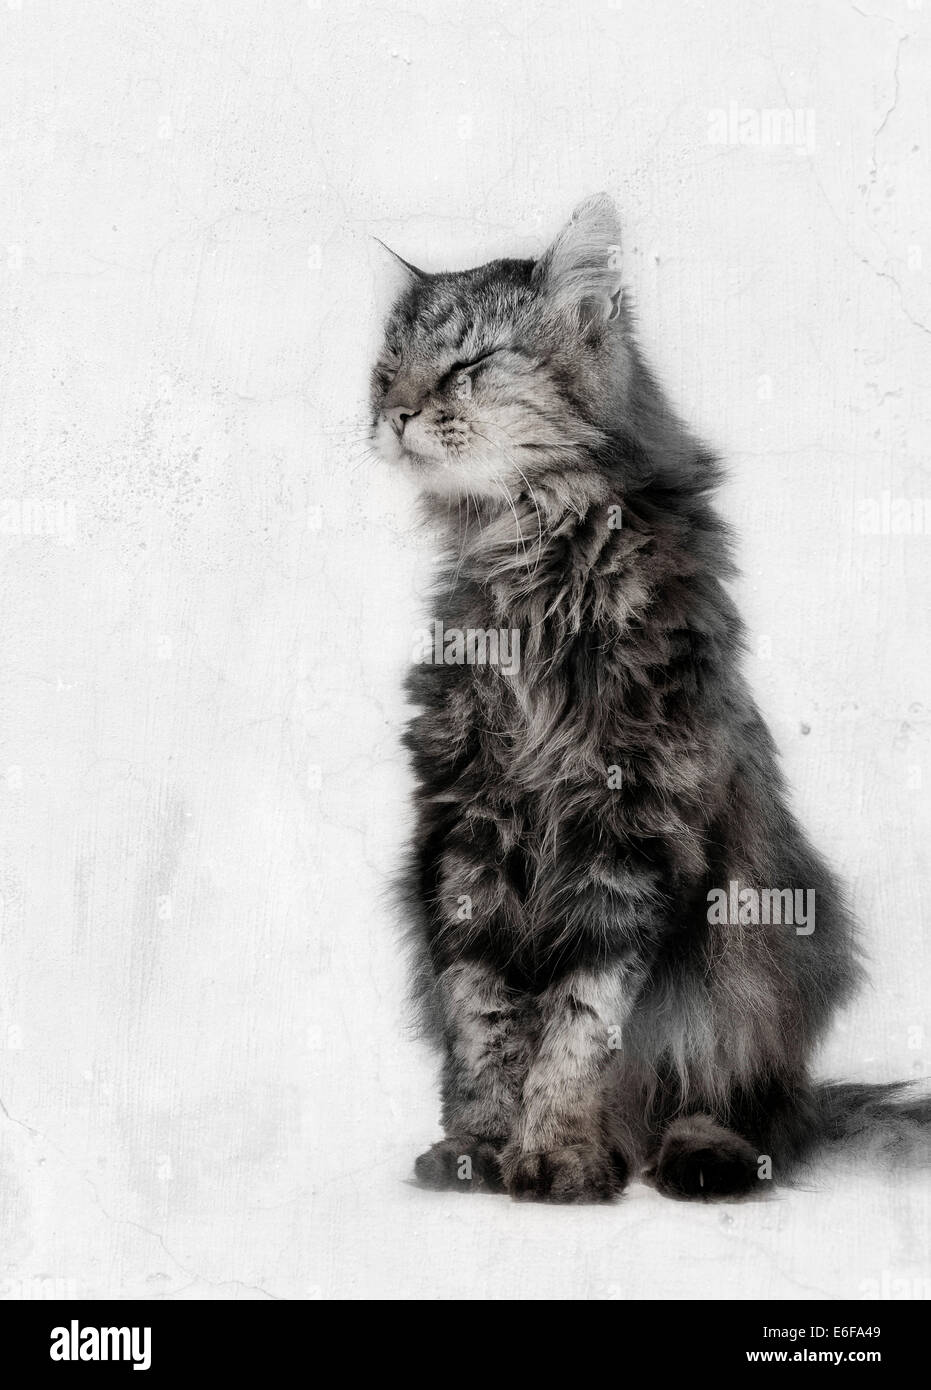 Old long haired cat Stock Photo